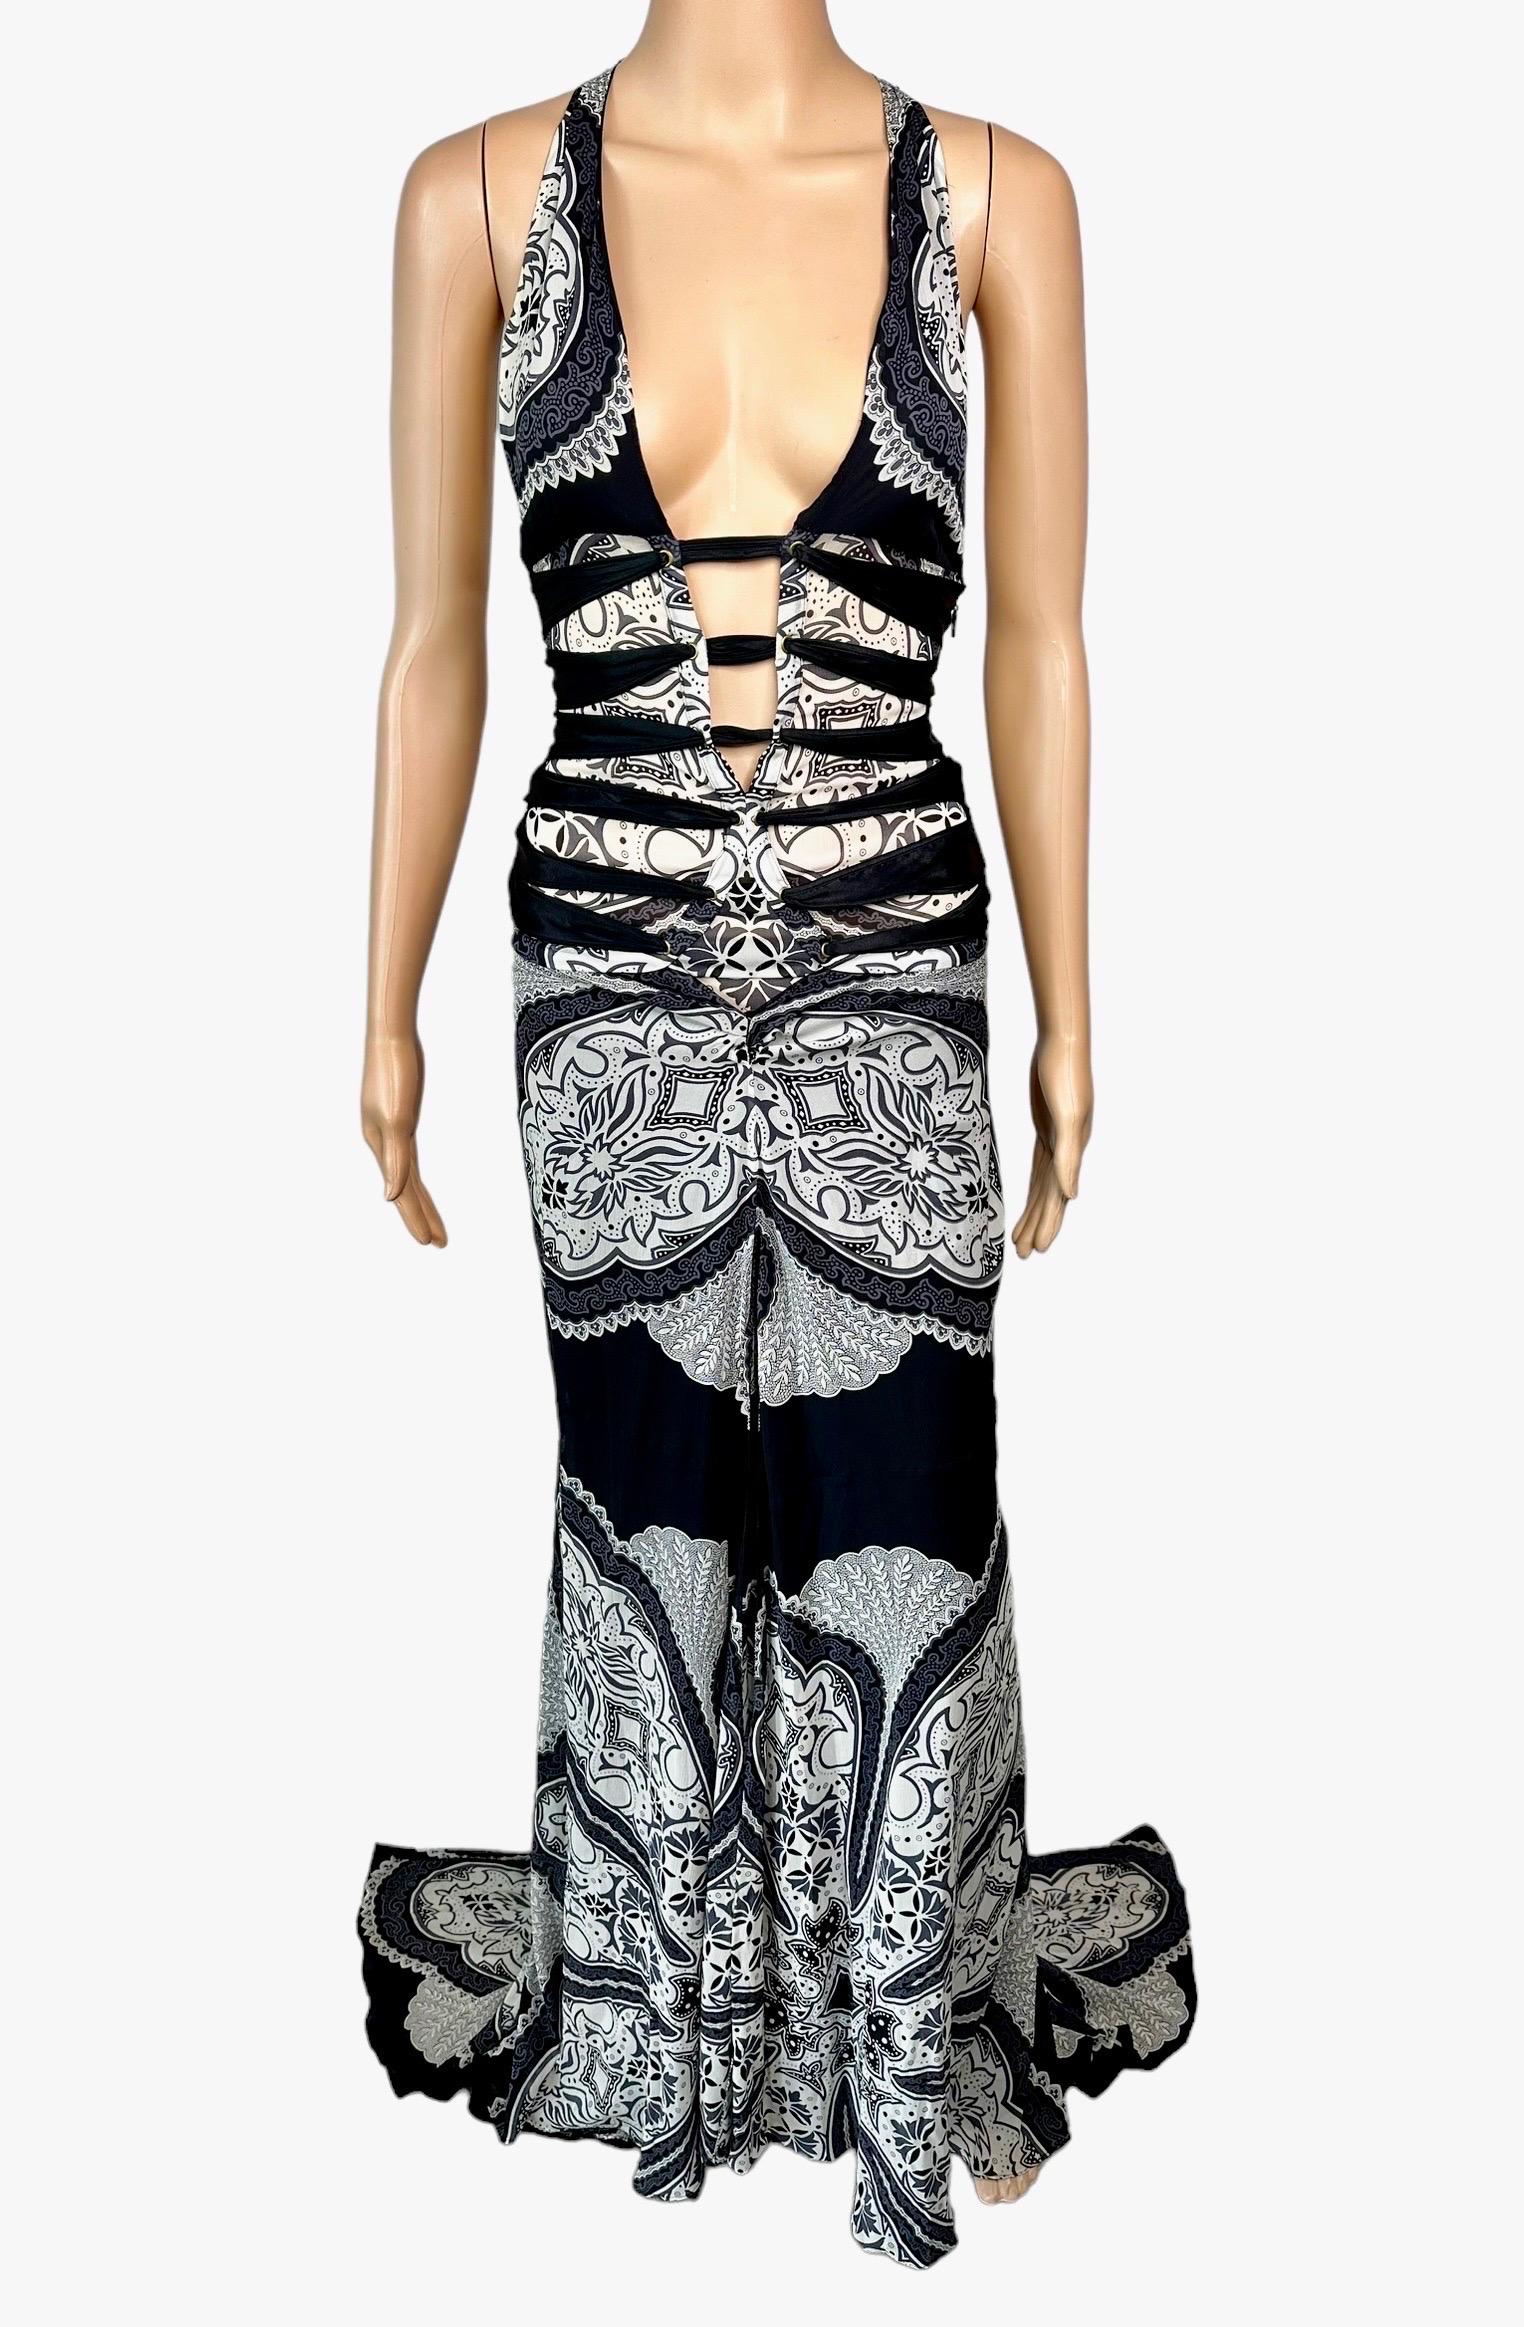 Tom Ford for Gucci Cruise 2004 Plunging Cutout Strappy Silk Evening Dress Gown In Good Condition For Sale In Naples, FL